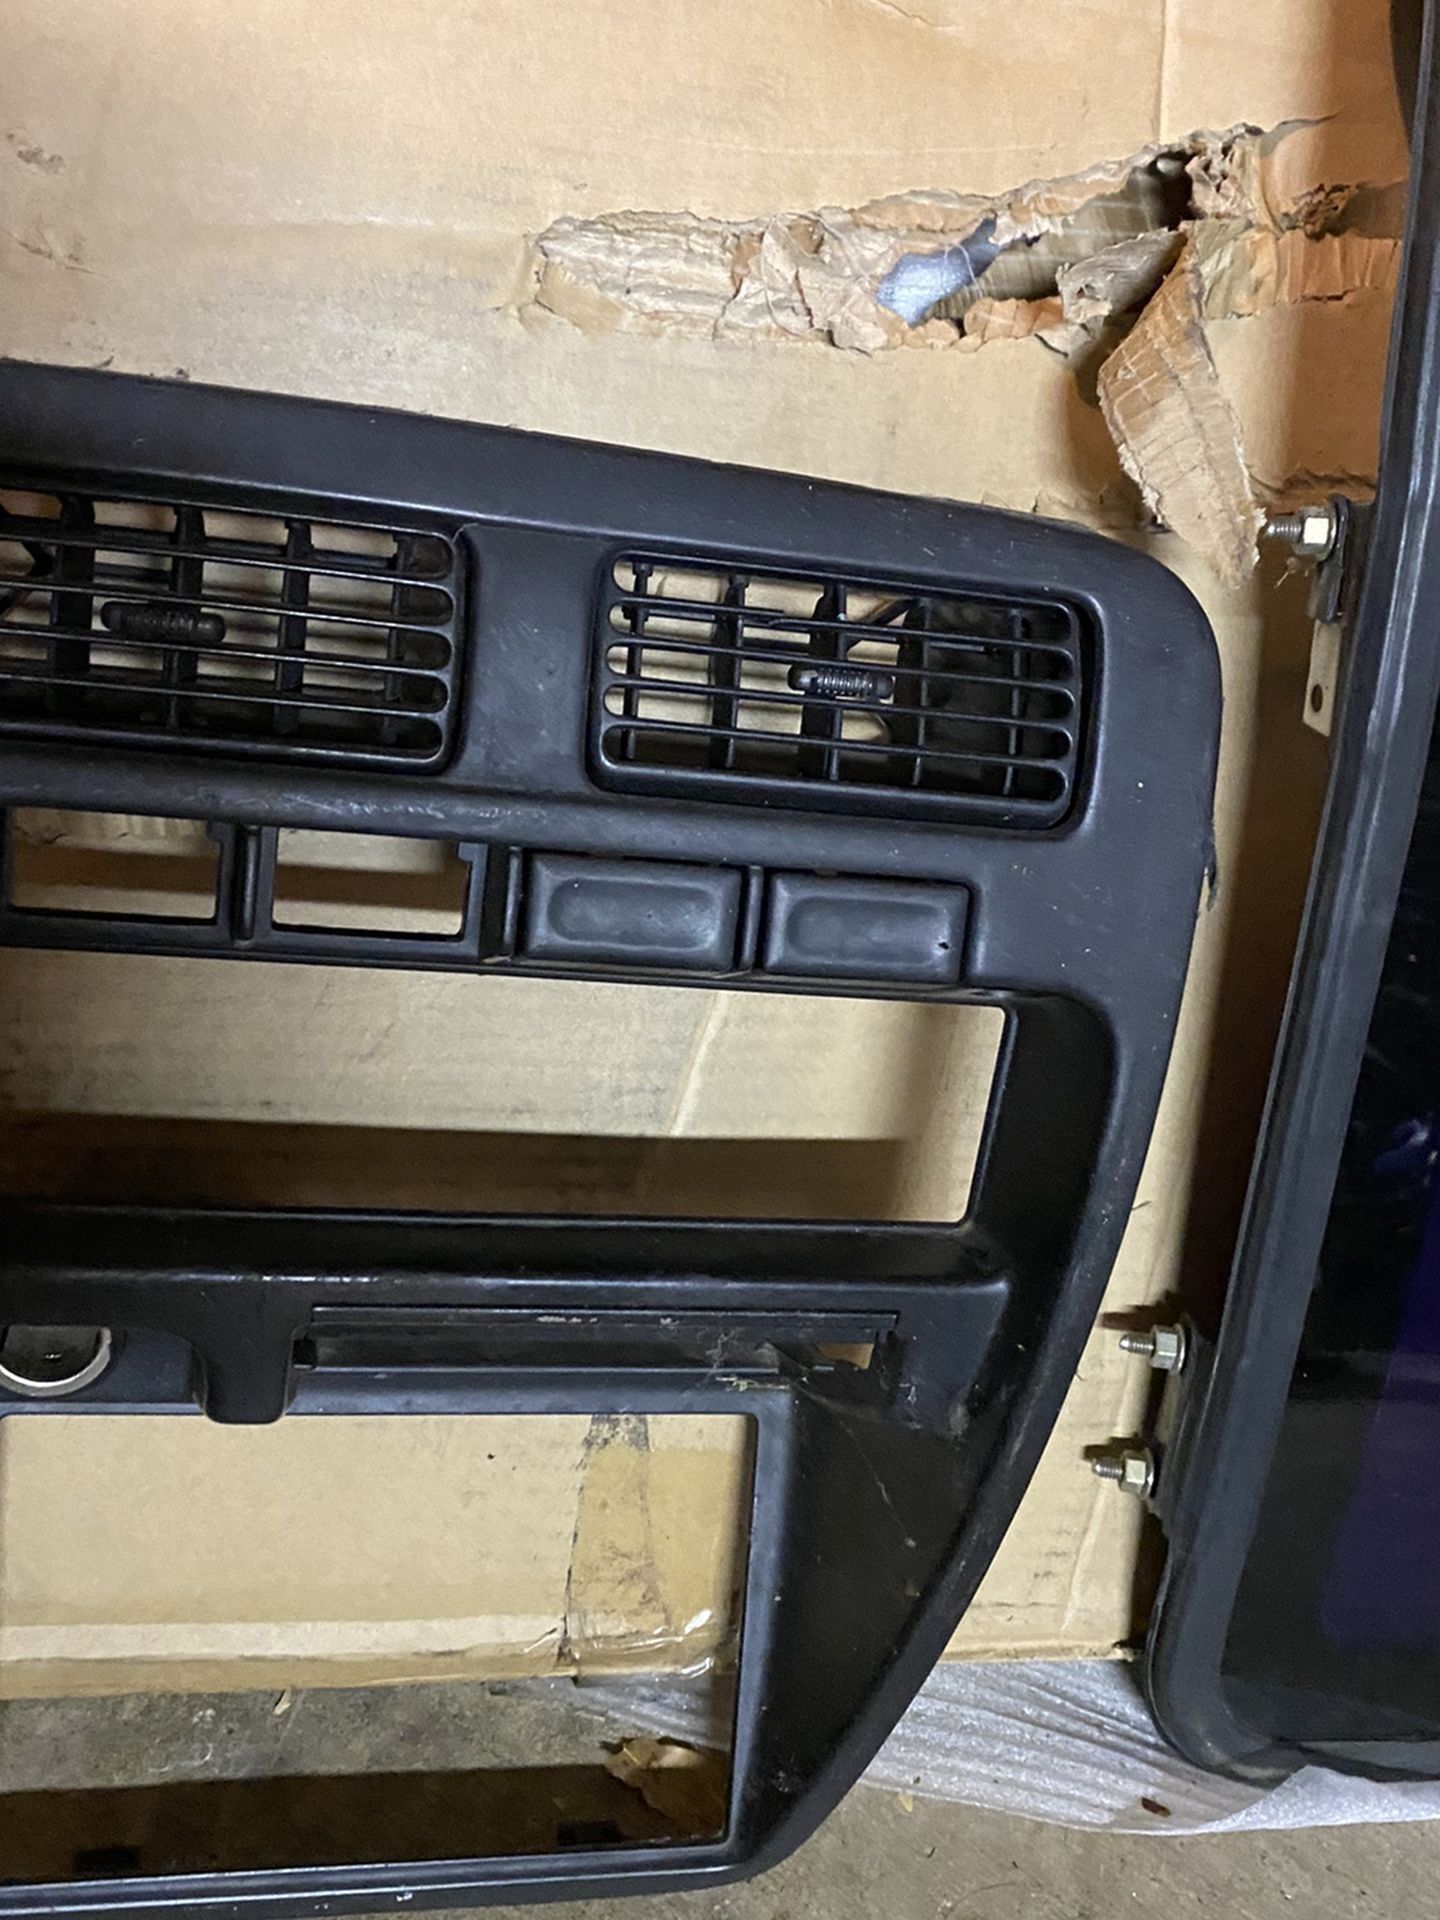 I Have These 2 Windows, and There is another Part: They Fit Nissan D21 From The Year 94 To 97